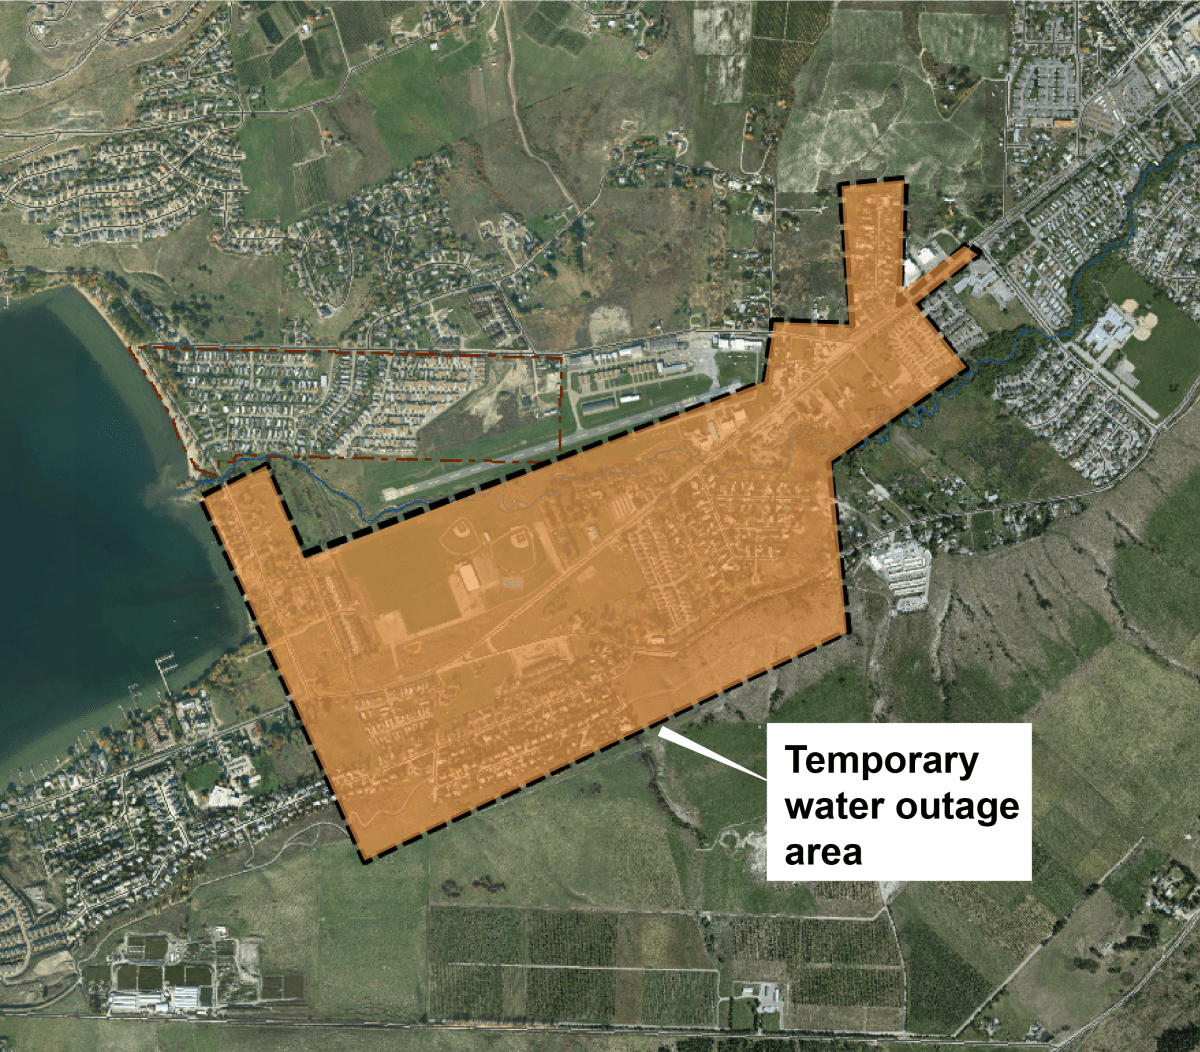 A map showing the one-day water outage for Vernon’s Okanagan Landing area on April 5, 2022.